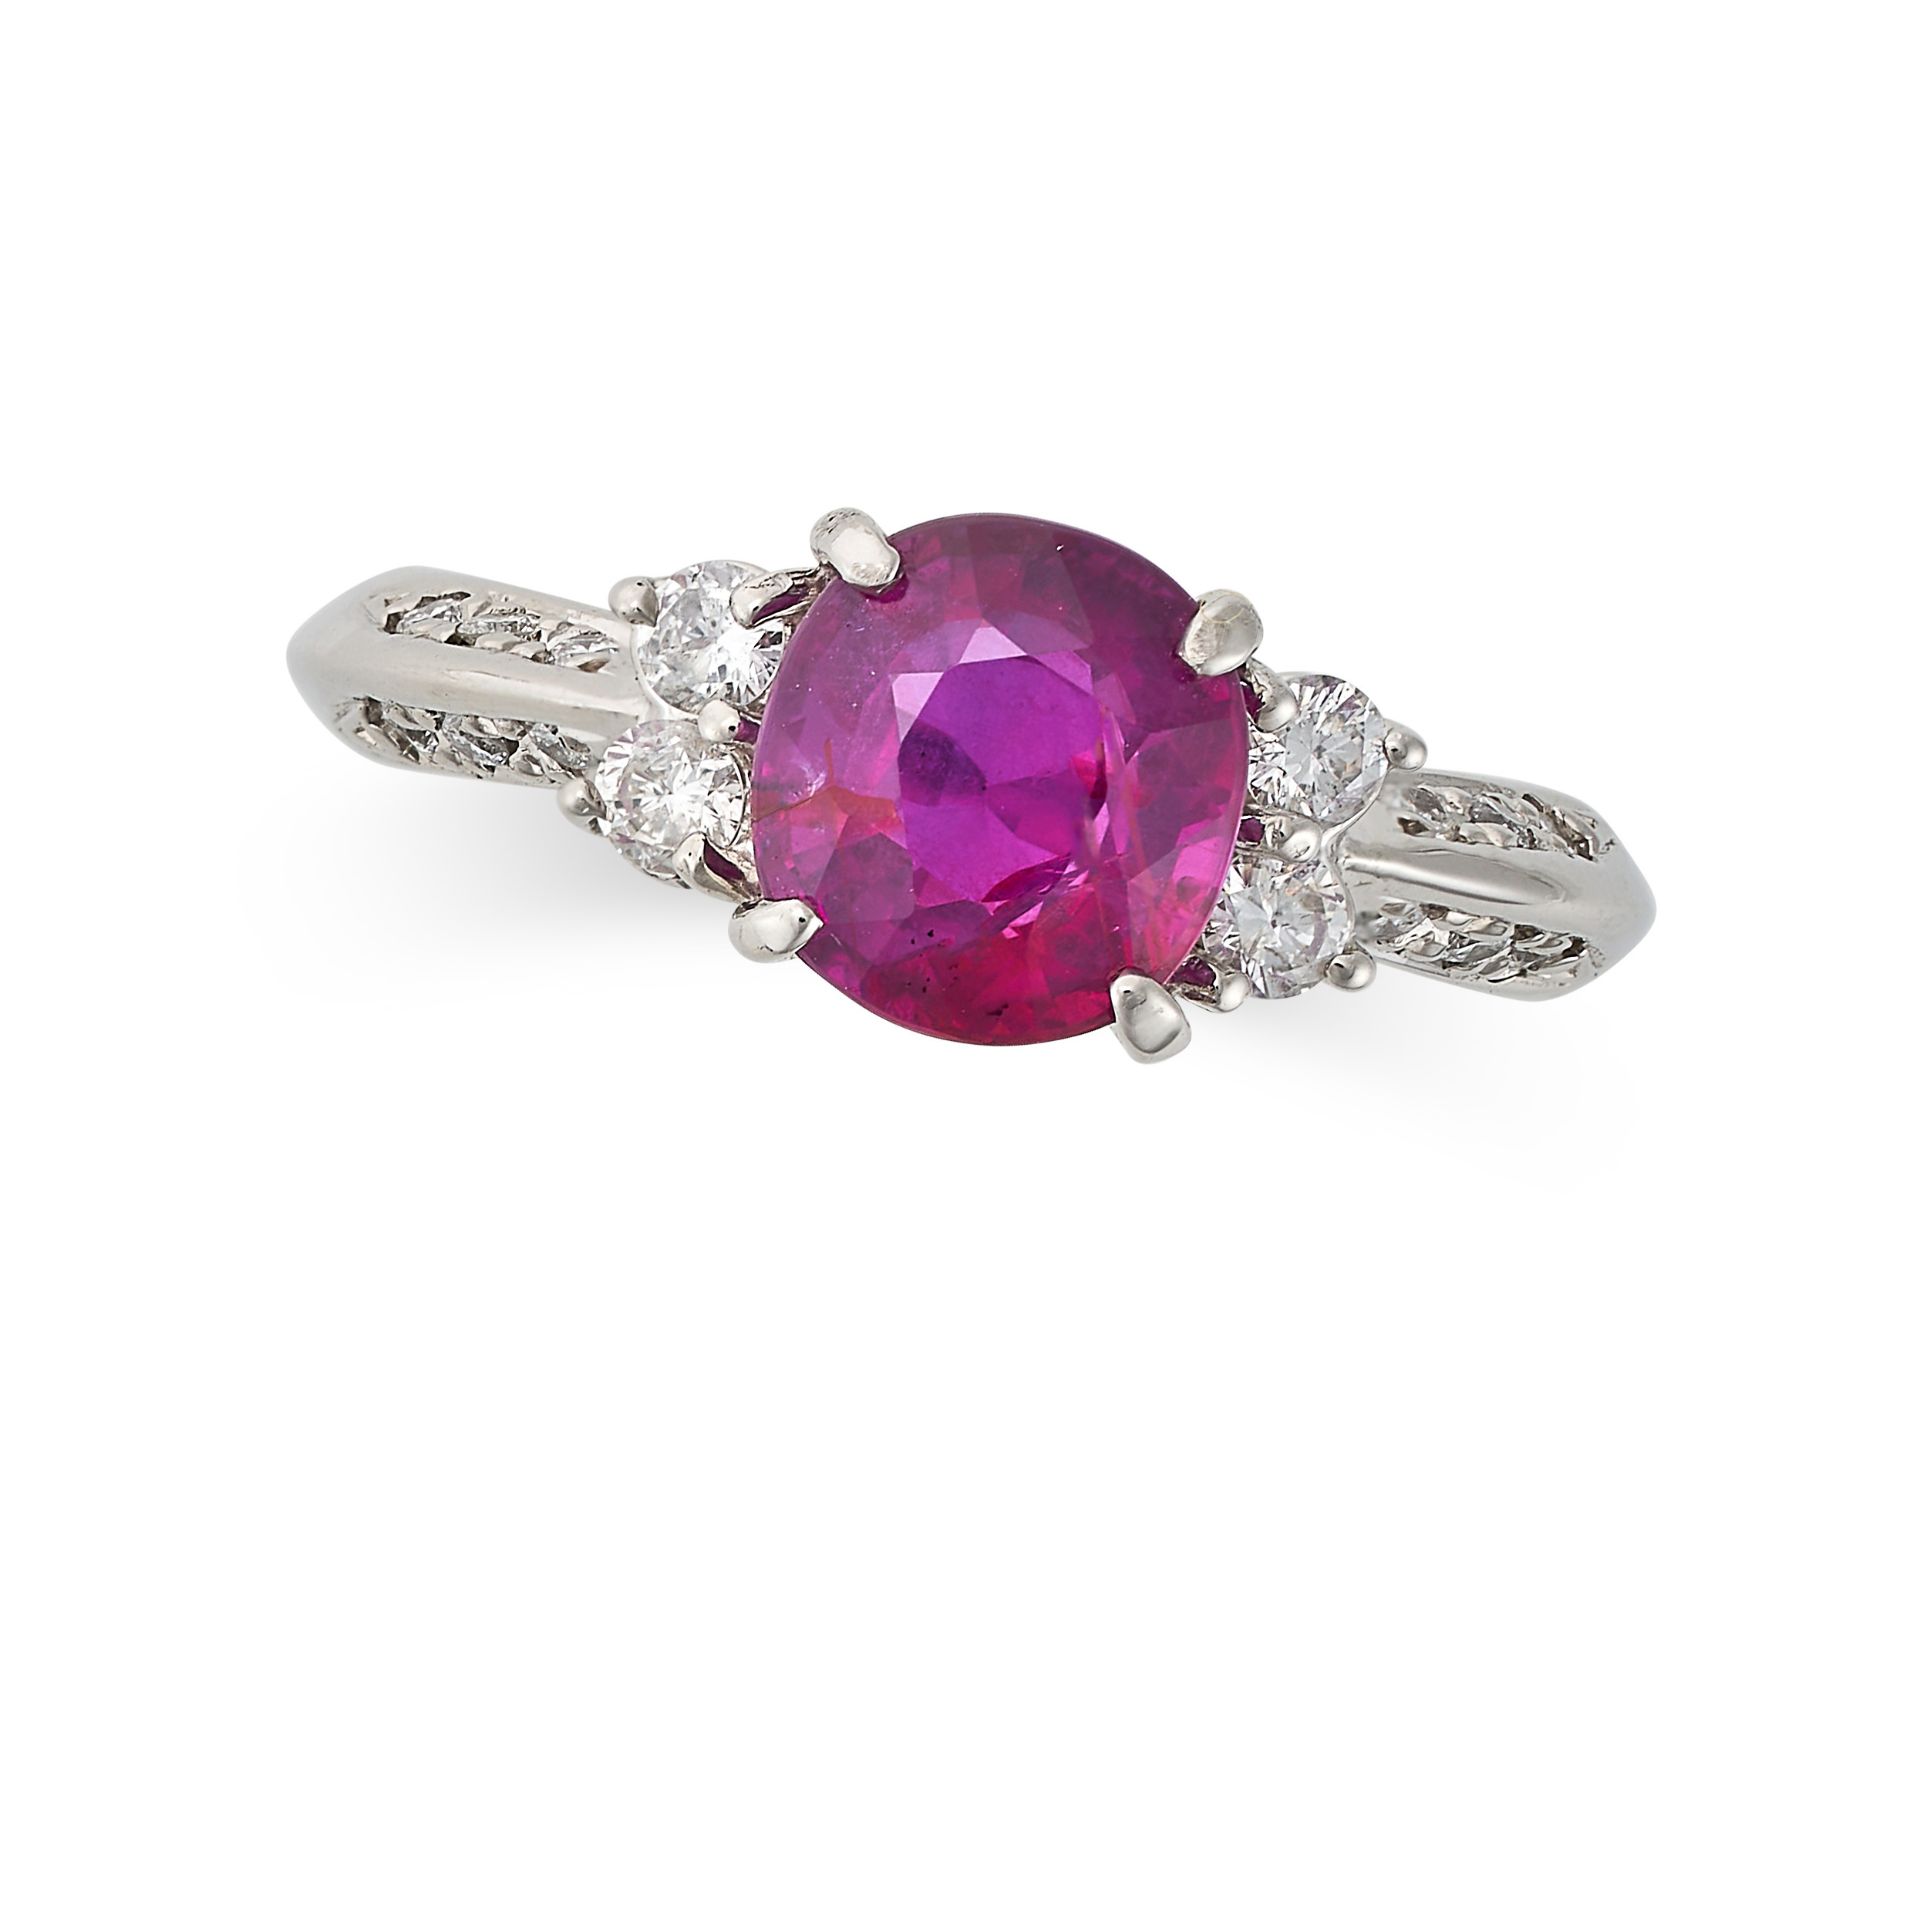 AN UNHEATED RUBY AND DIAMOND RING in platinum, set with an oval cut ruby of 2.16 carats accented ...